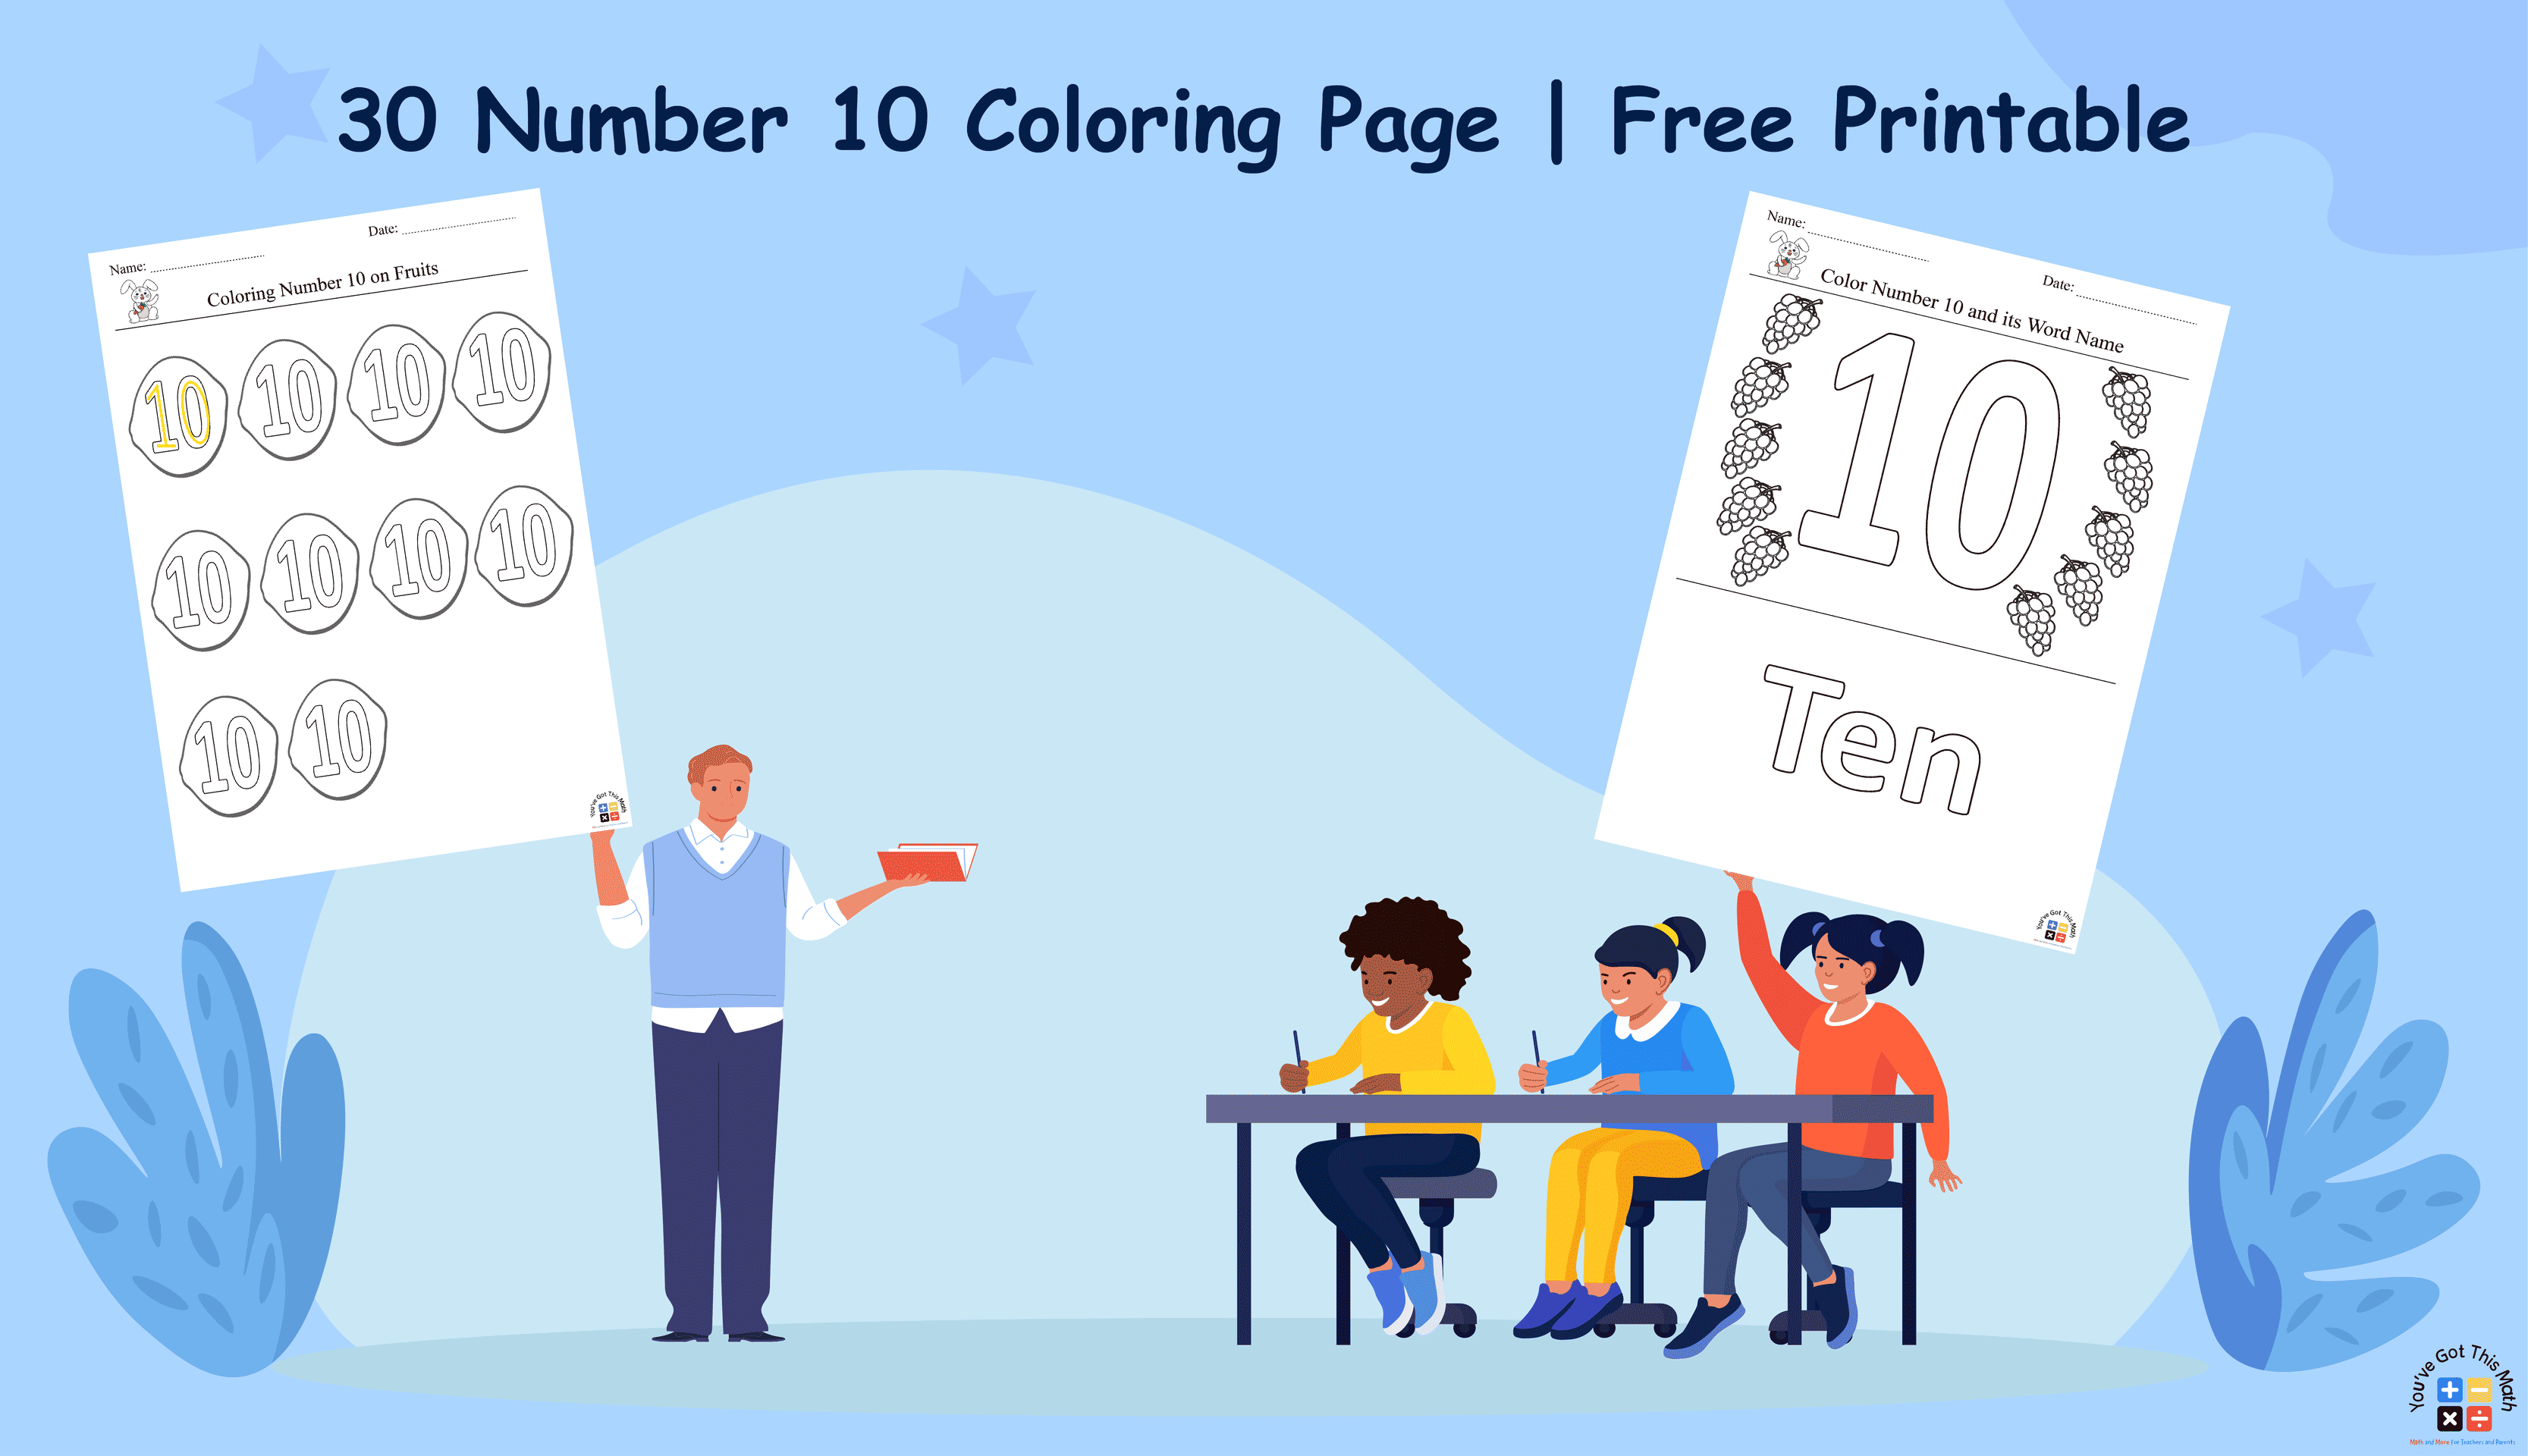 30 Number 10 Coloring Pages | Free Printable